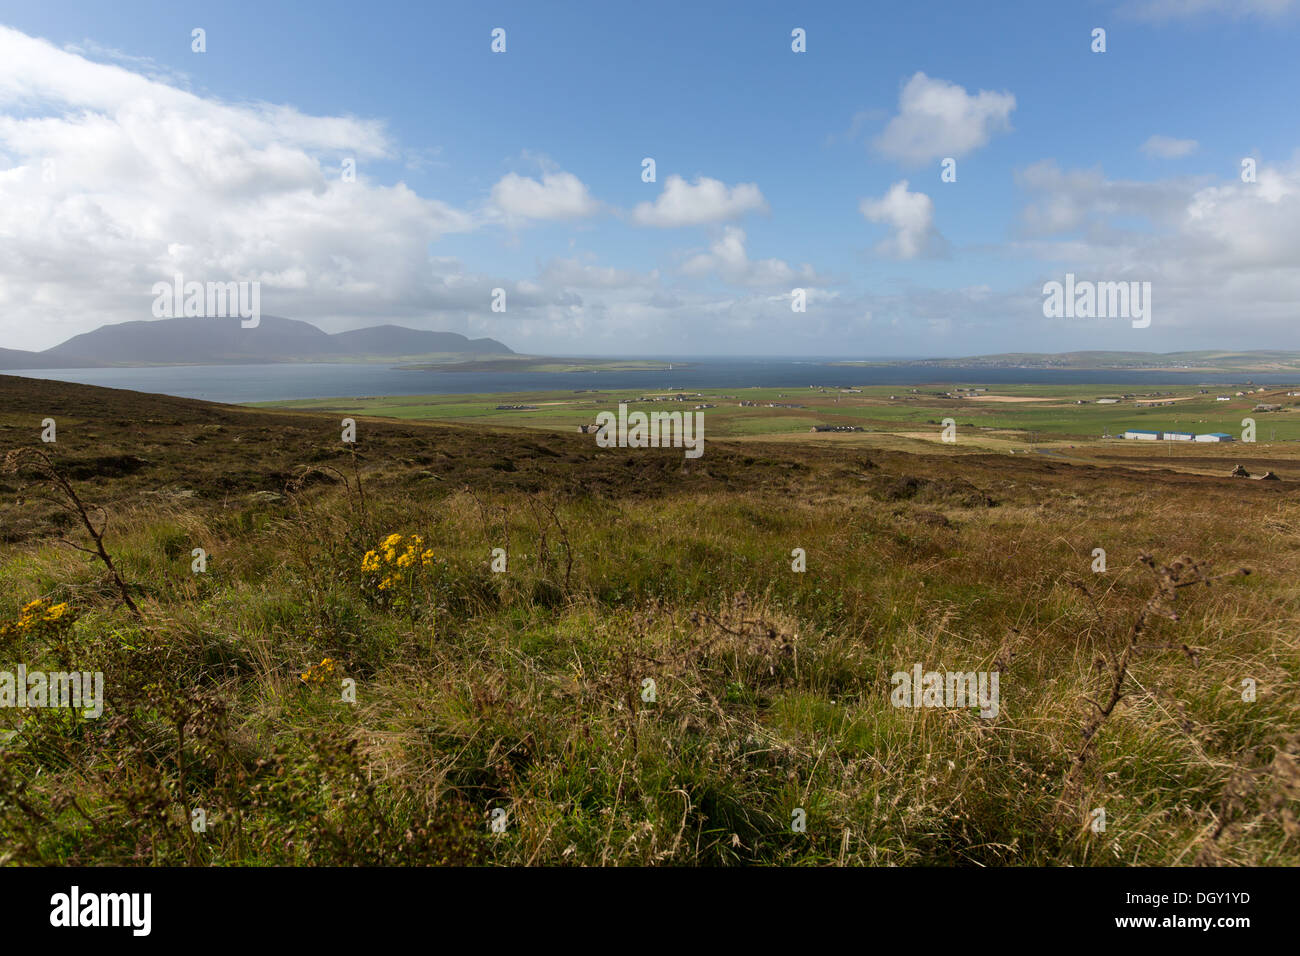 Islands of Orkney, Scotland. View of Orkney’s Mainland with the town of Stromness, in the distance, on the right of the image. Stock Photo